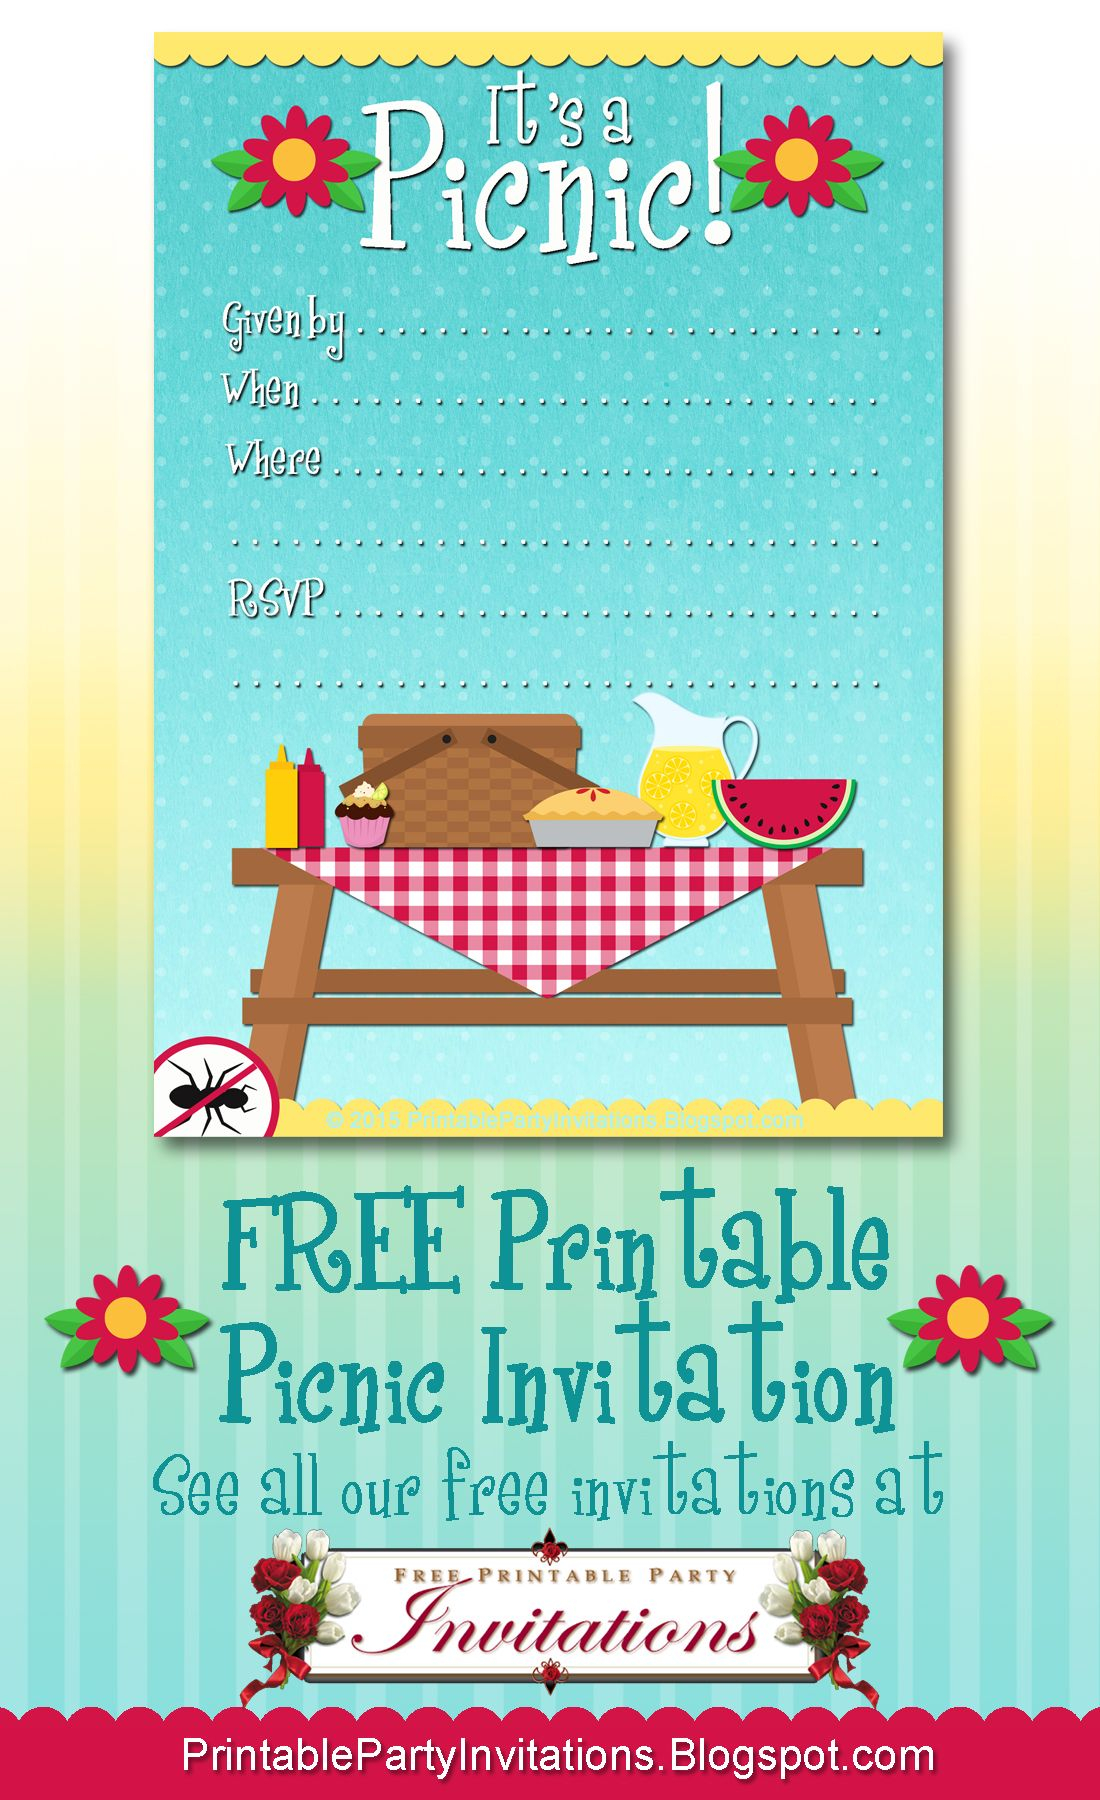 Free Printable Picnic Invitation Party Printables Picnic in sizing 1100 X 1800